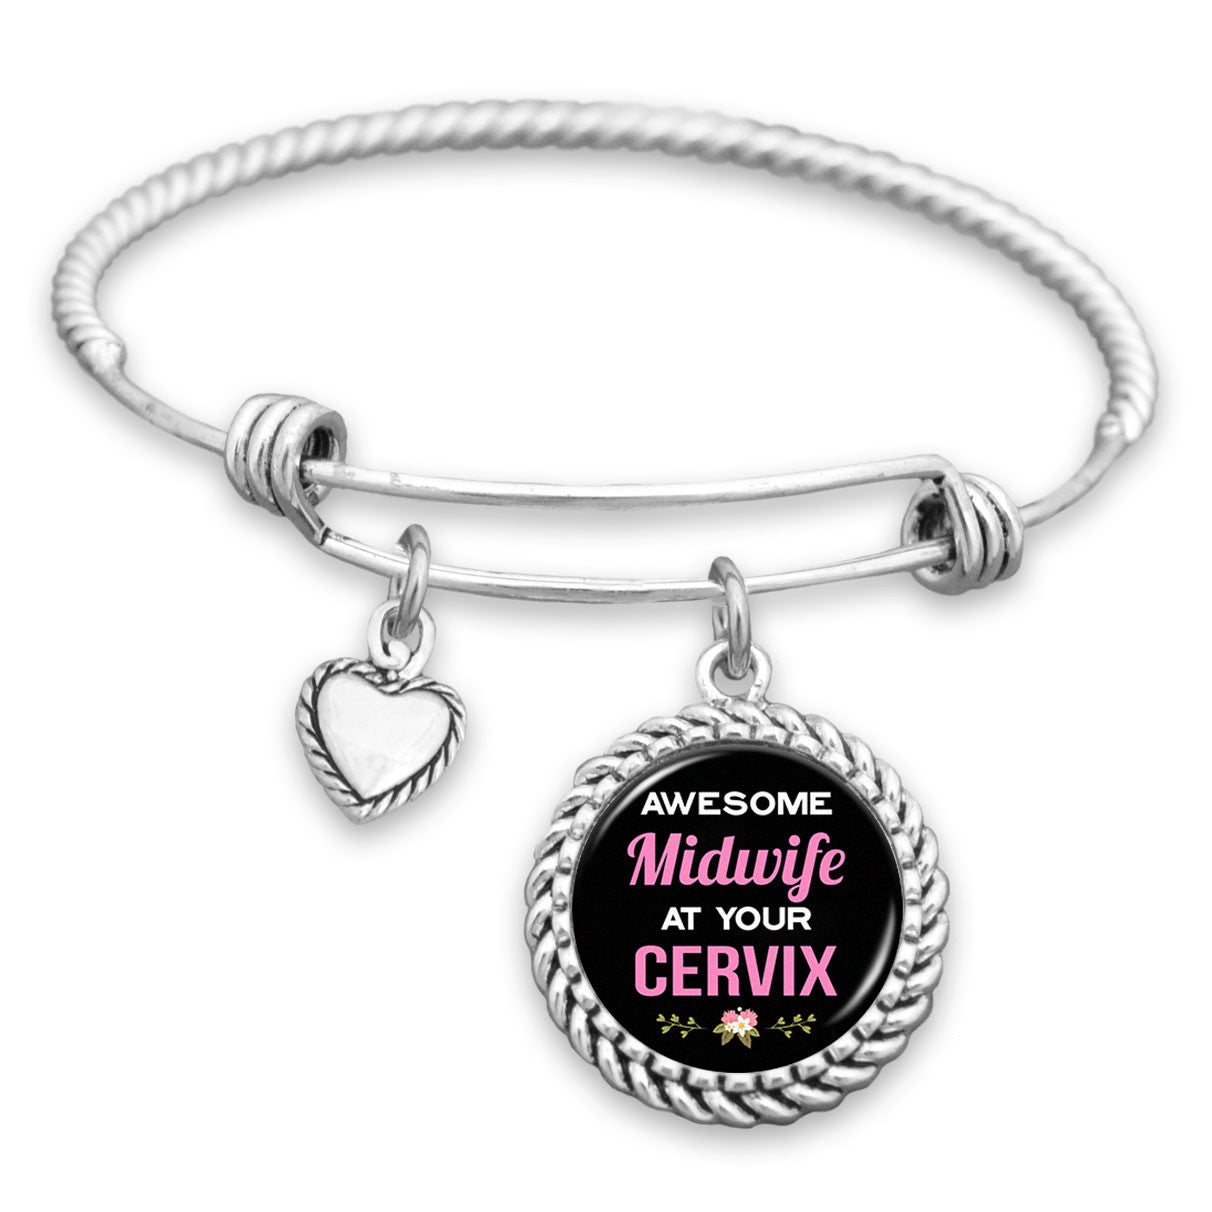 Awesome Midwife At Your Cervix Charm Bracelet